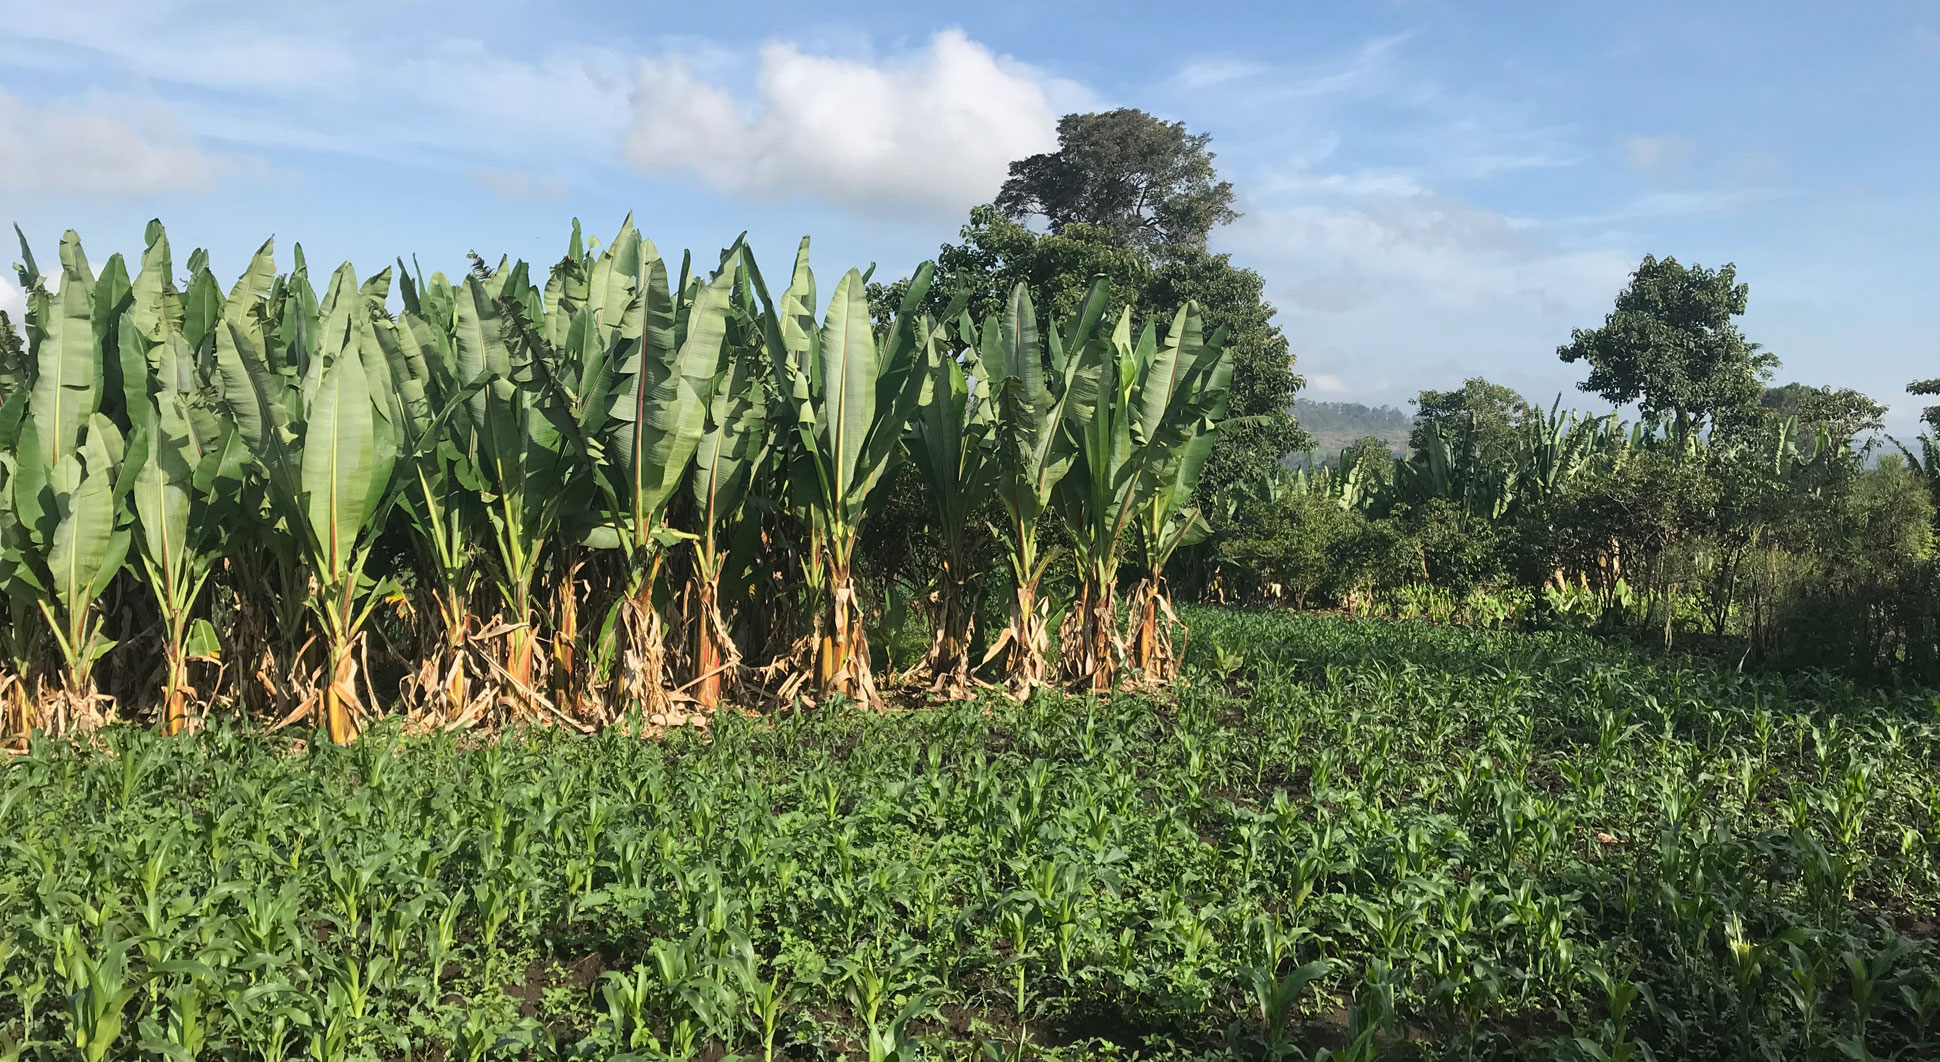 A group of tall green enset plants growing next to a small area of maize